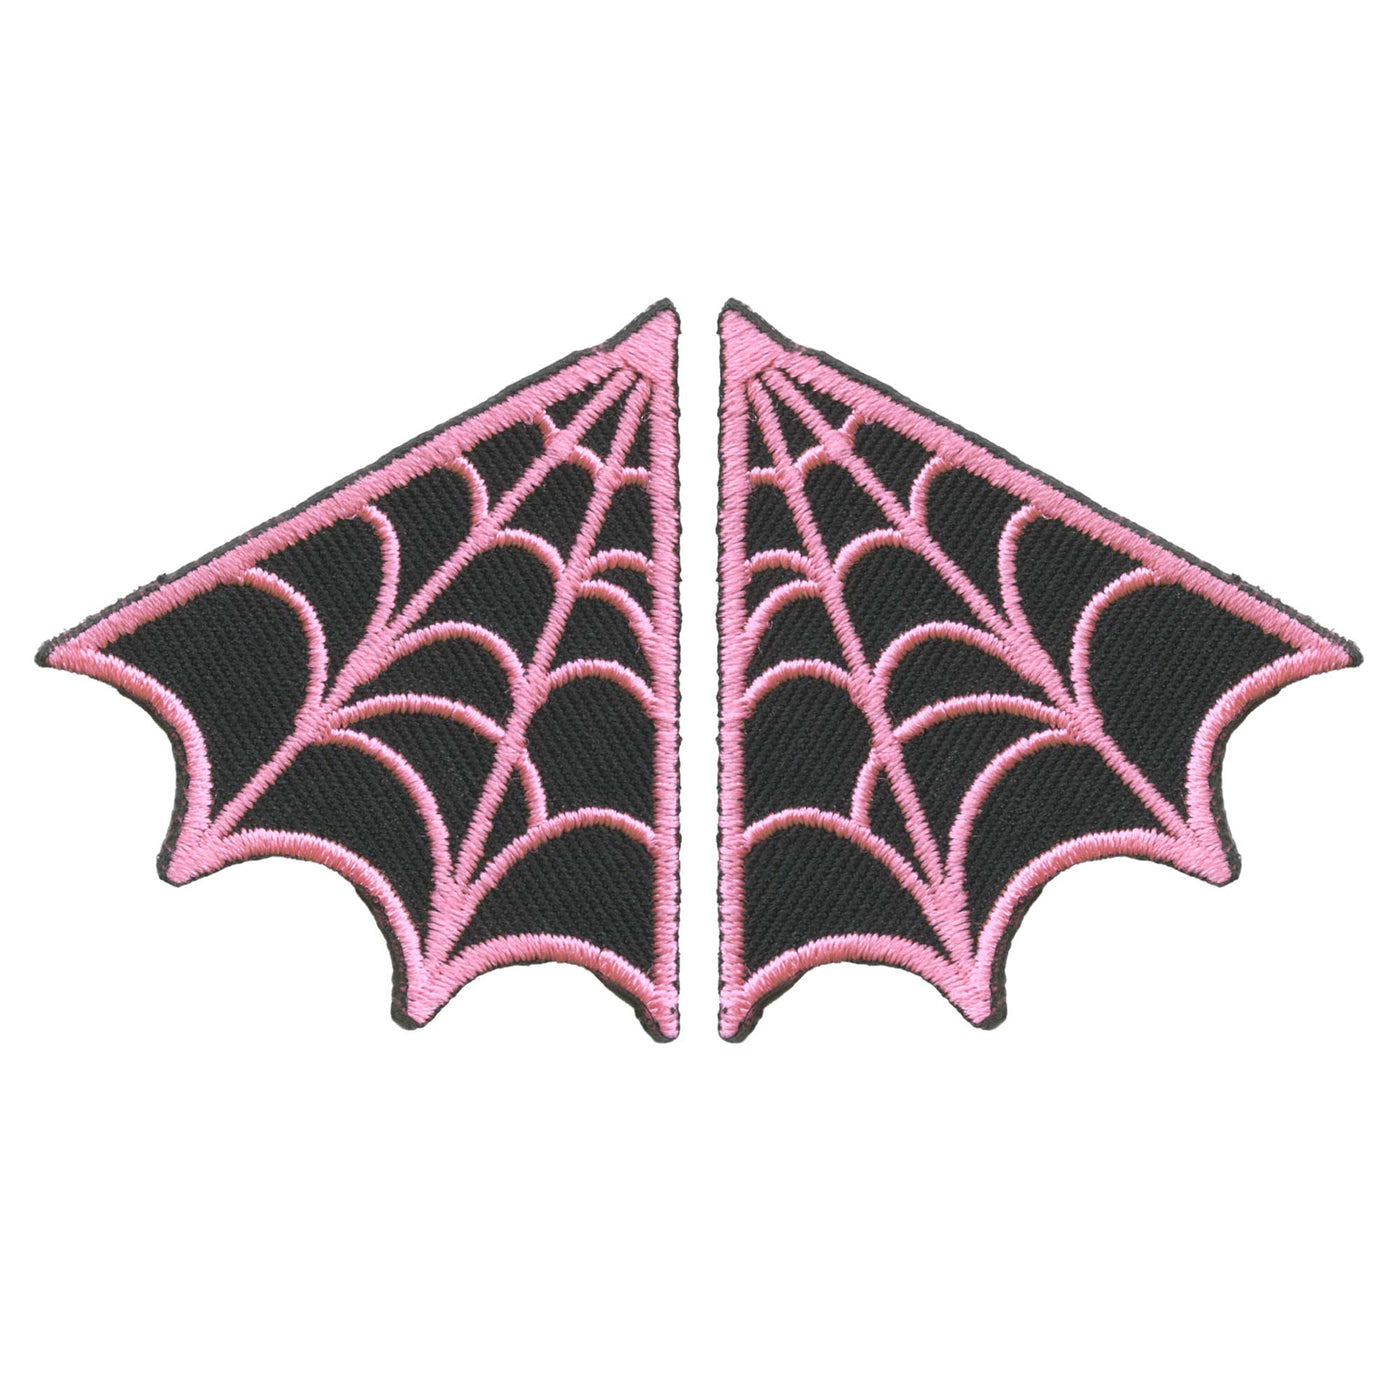 set of two black and pink embroidered pointed spiderwebs in opposing design 